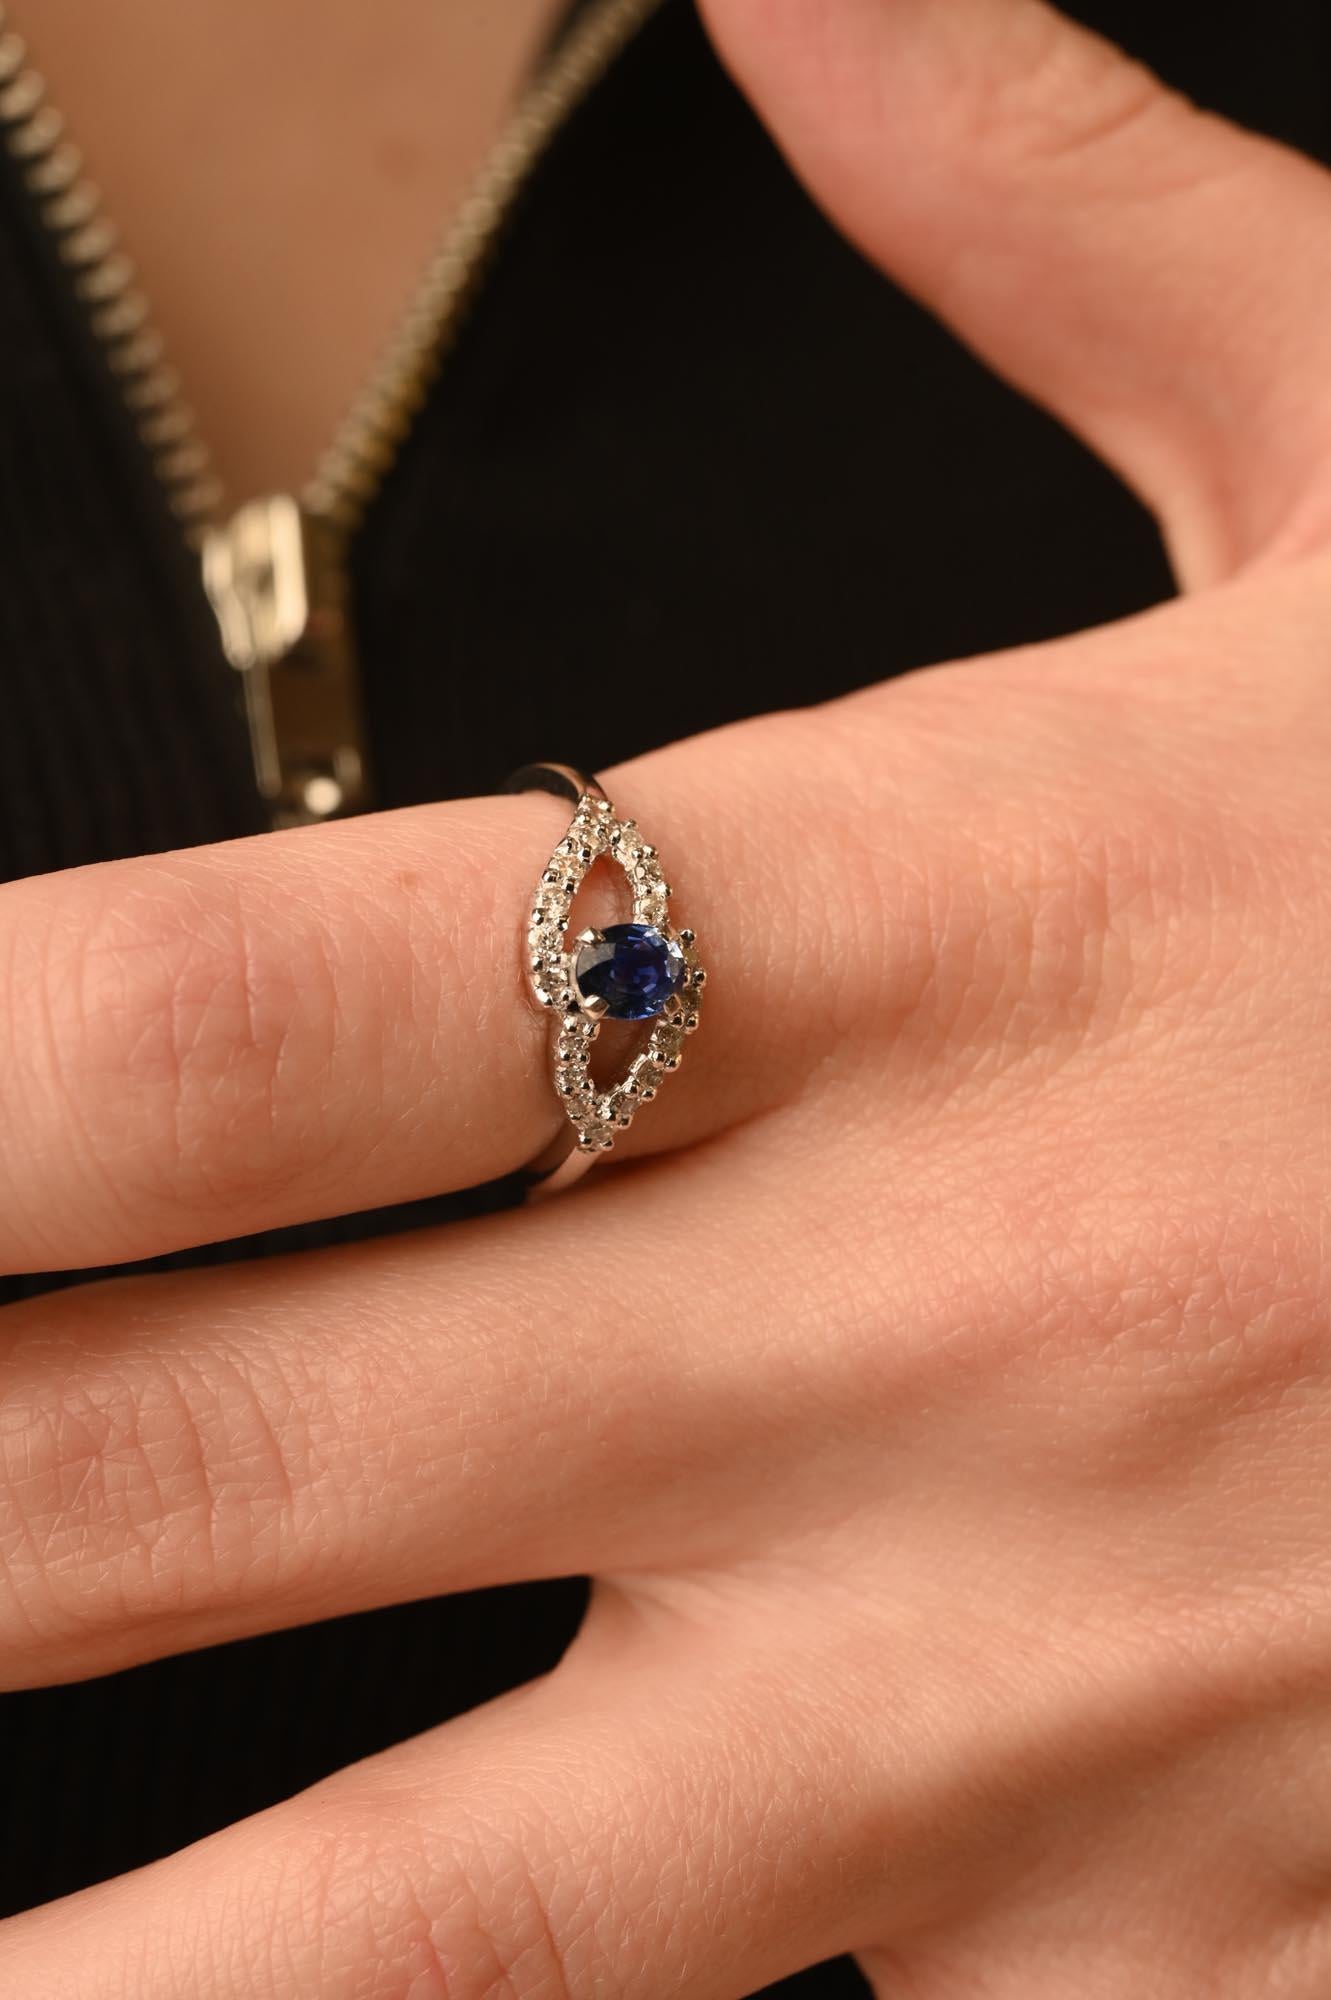 For Sale:  Alluring Blue Sapphire Ring with Diamonds Set in 14K Solid White Gold 11